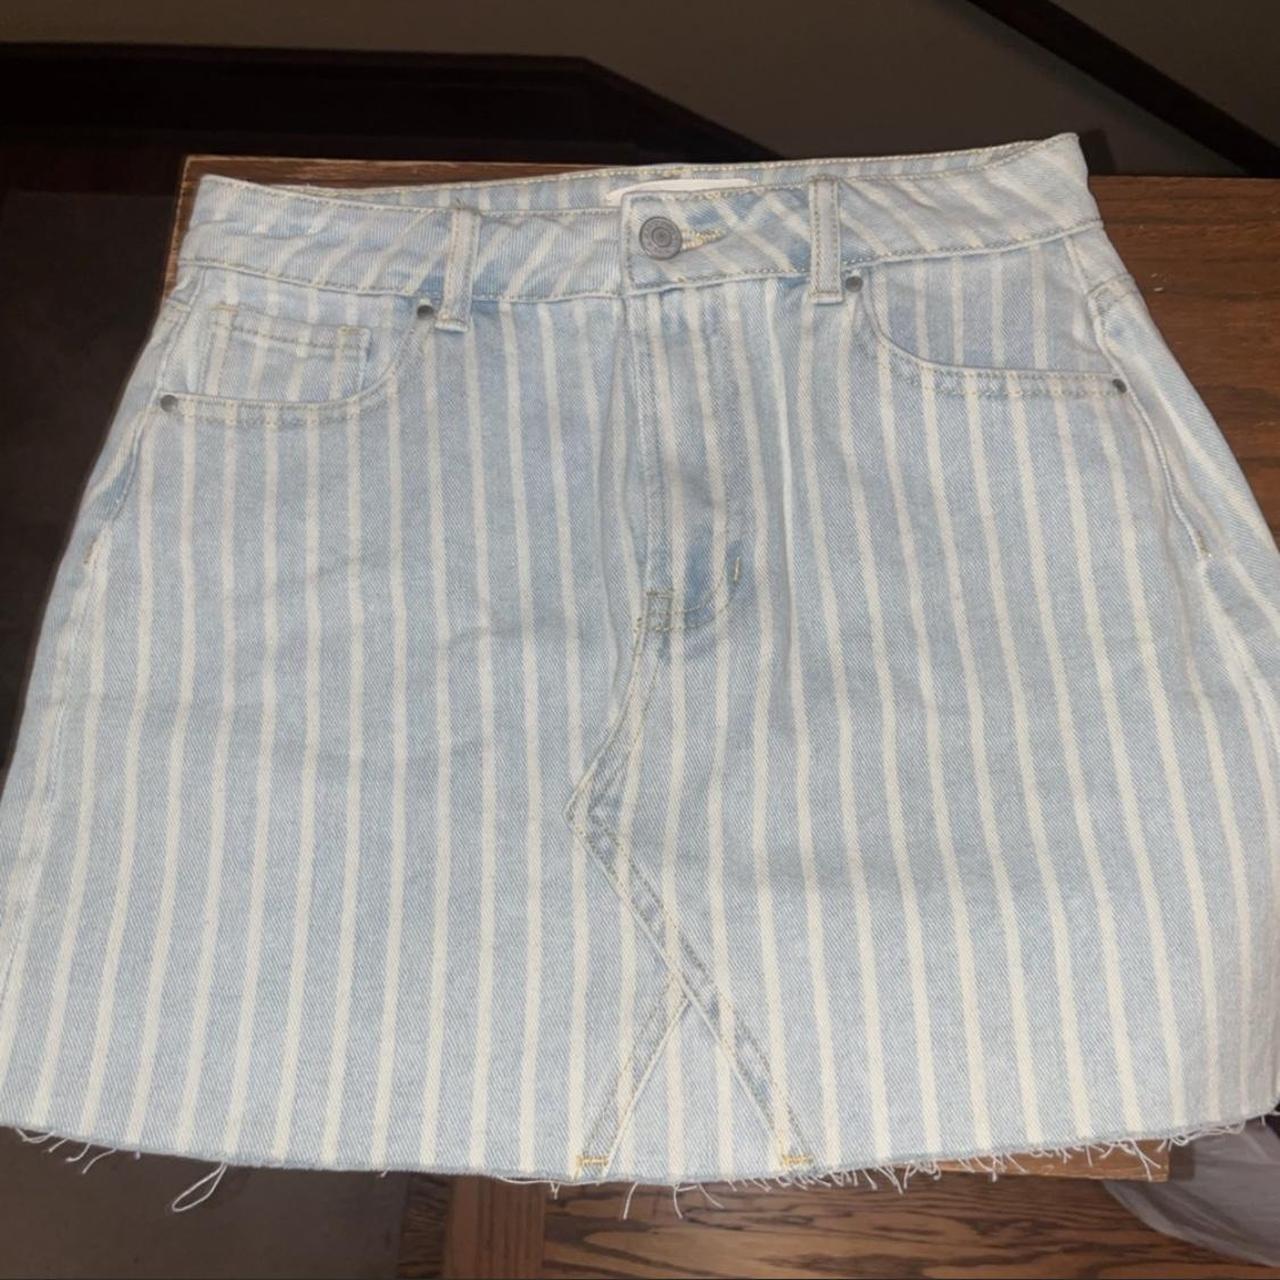 PacSun Women's Blue and White Skirt (2)